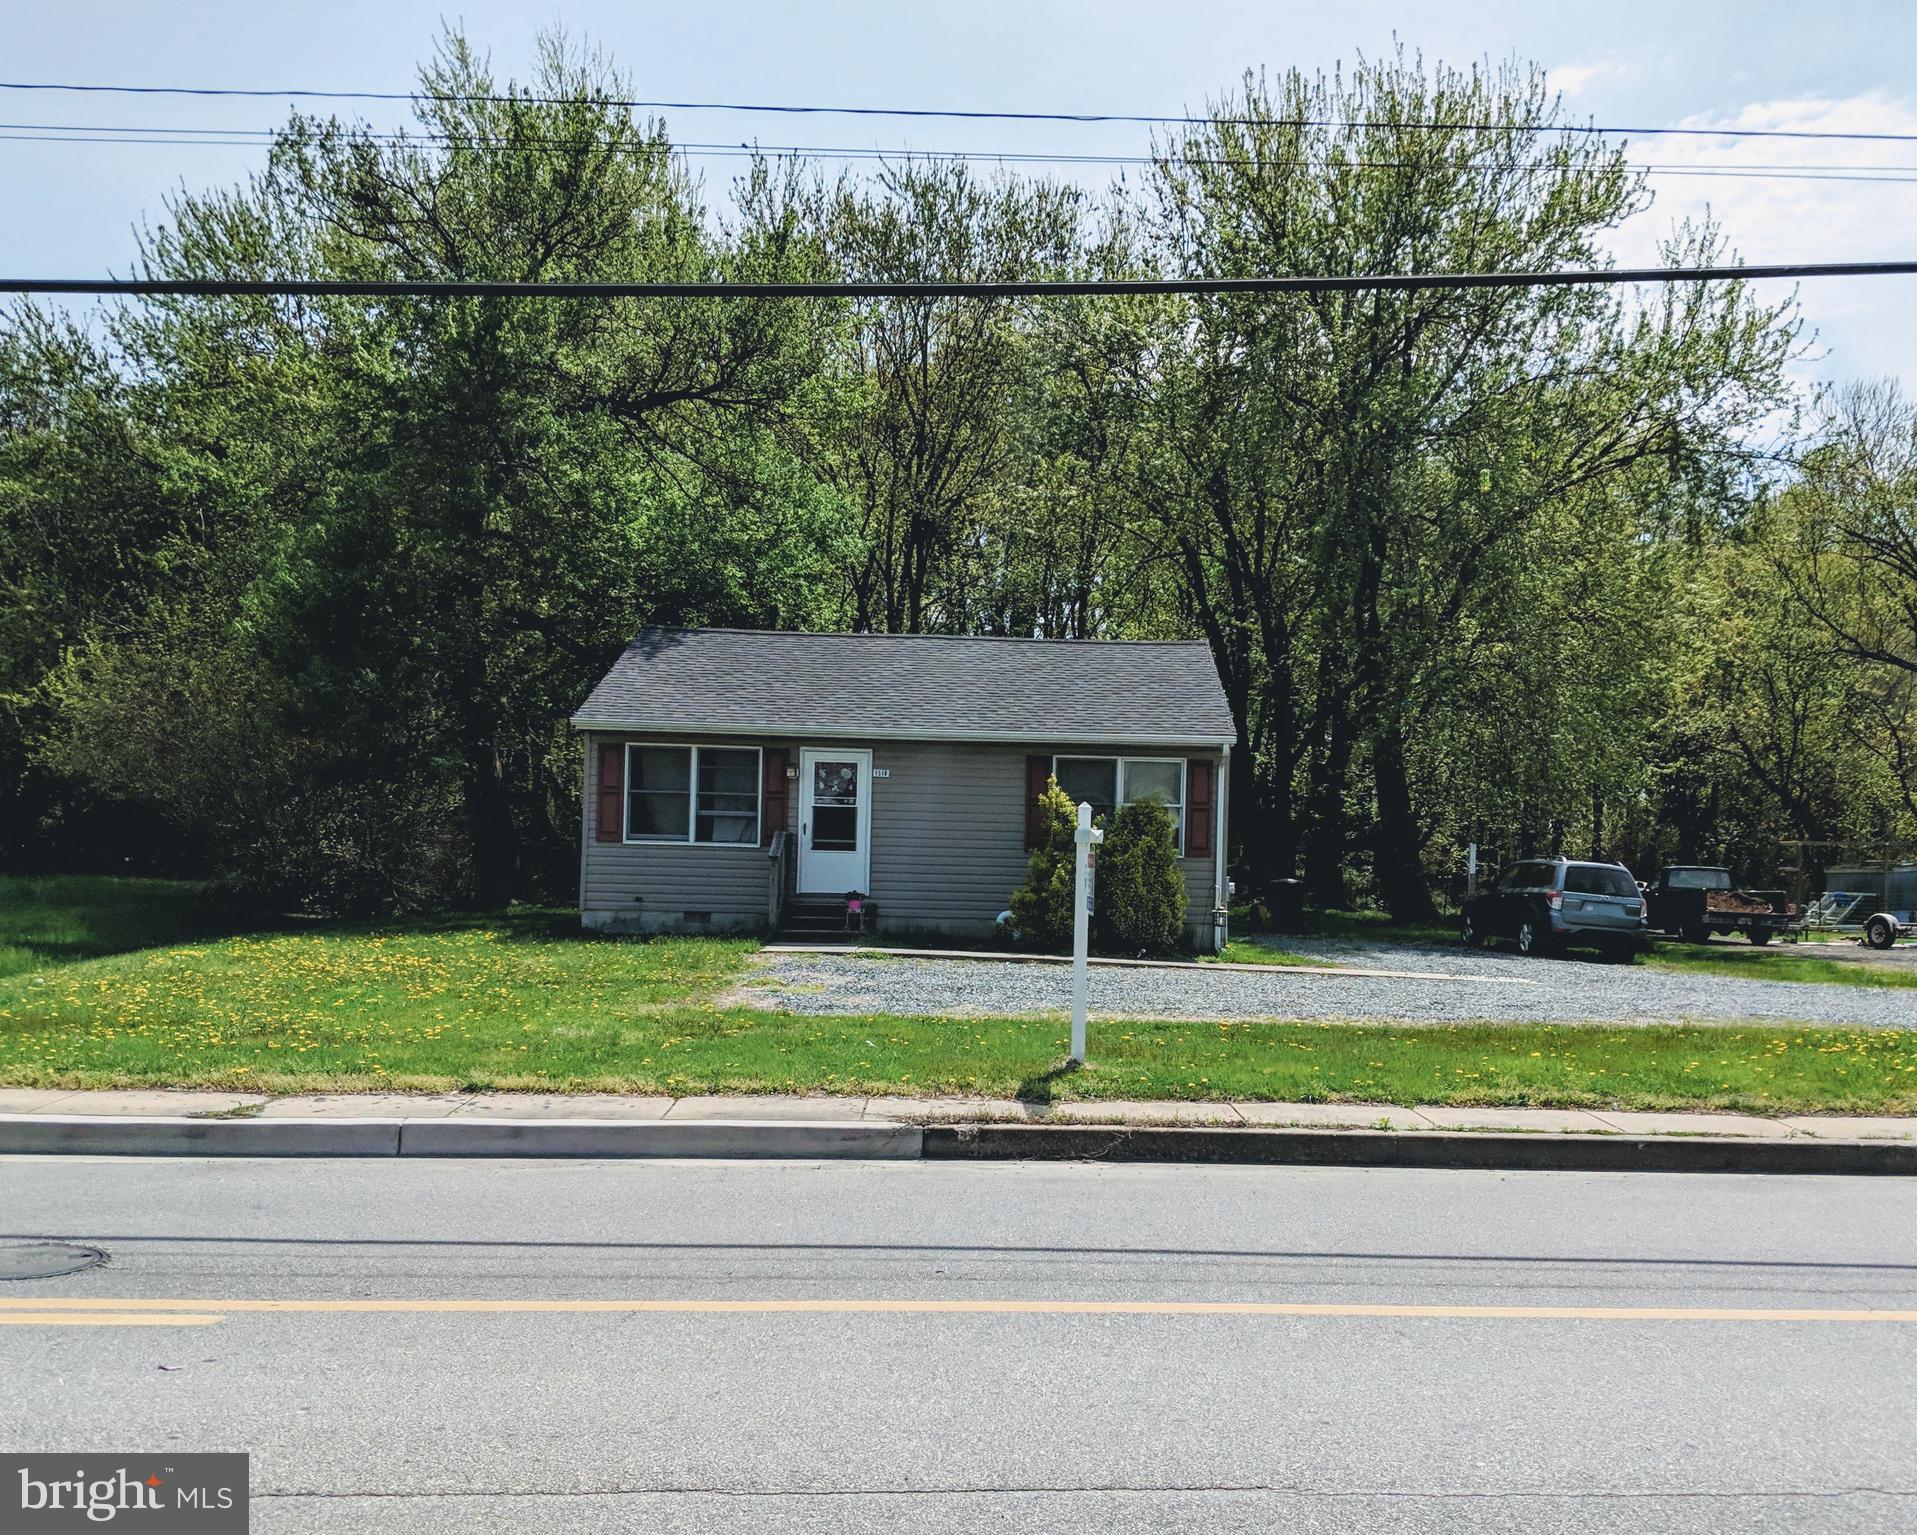 a view of a house and a yard